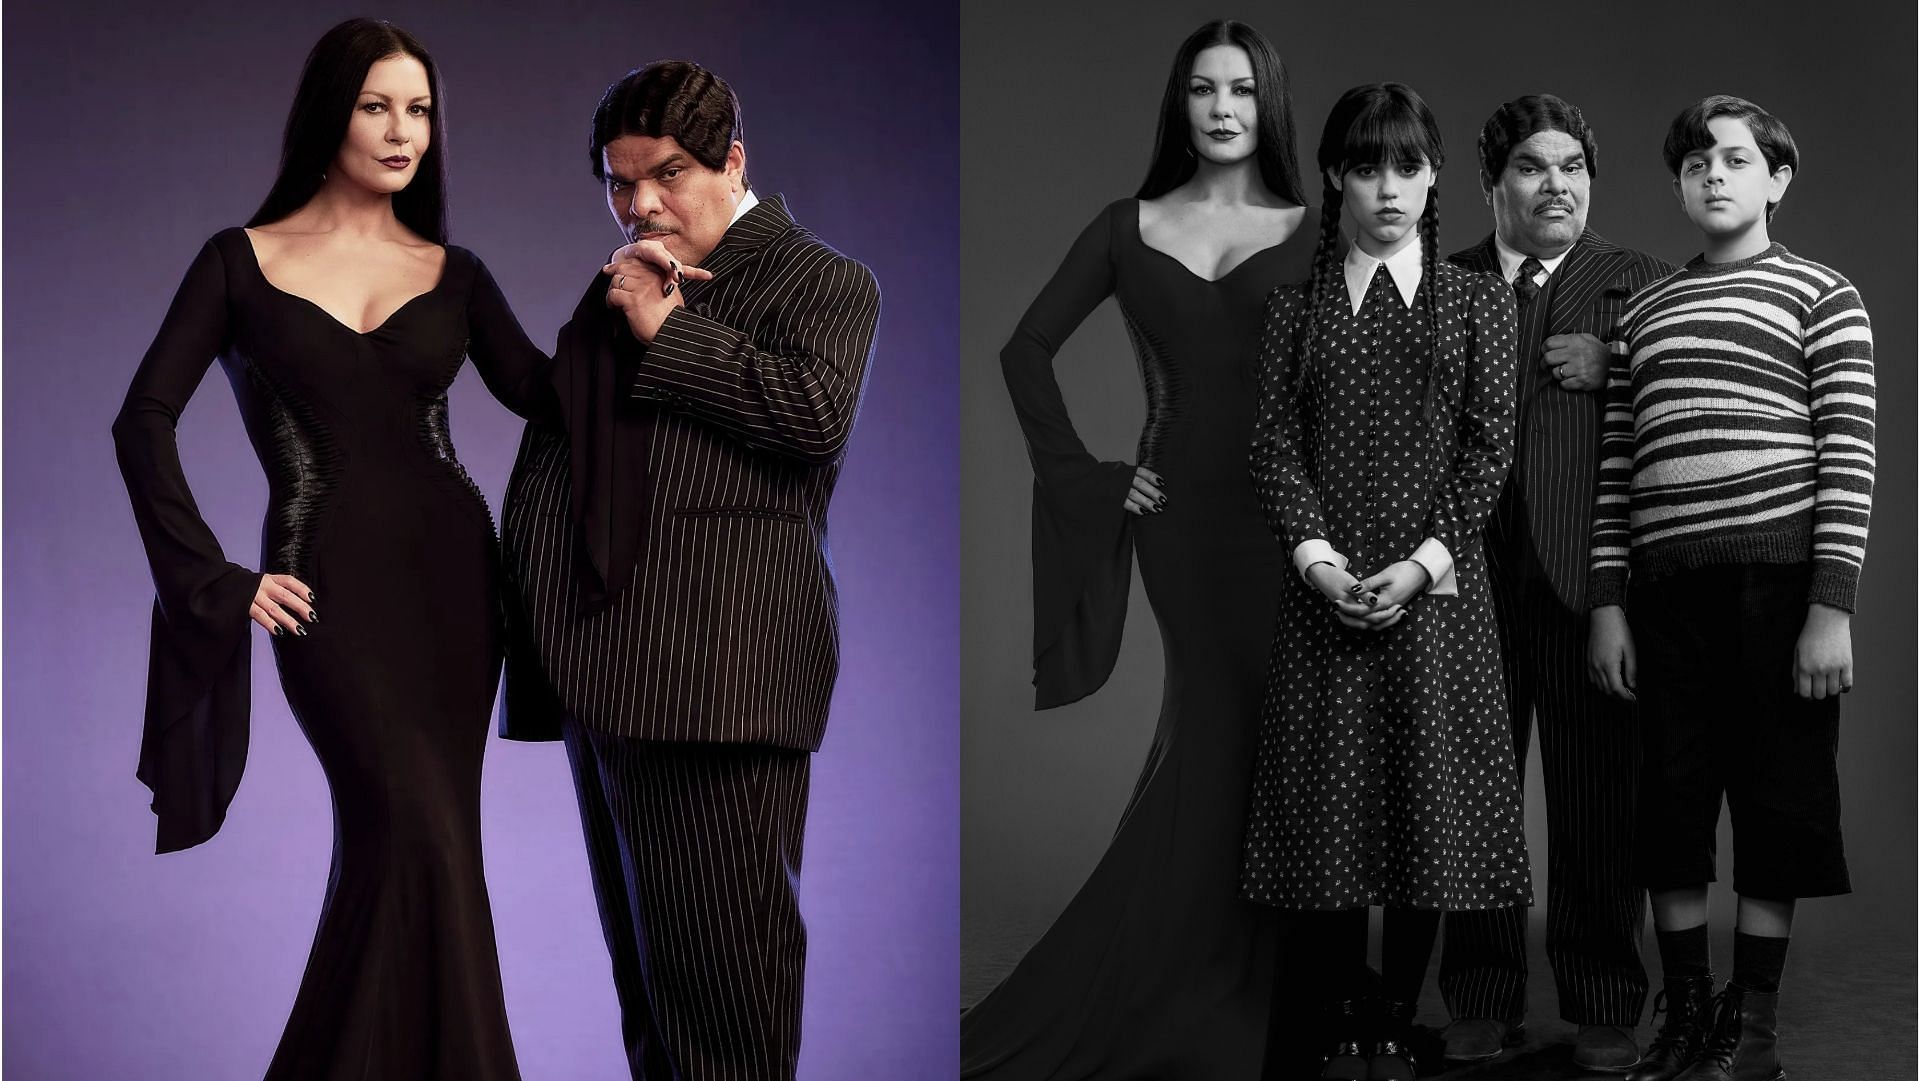 The first look at the Addams Family from Netflix&#039;s upcoming &#039;Wednesday&#039; starring Luis Guzm&aacute;n and others (Image via Vanity Fair, and Netflix)